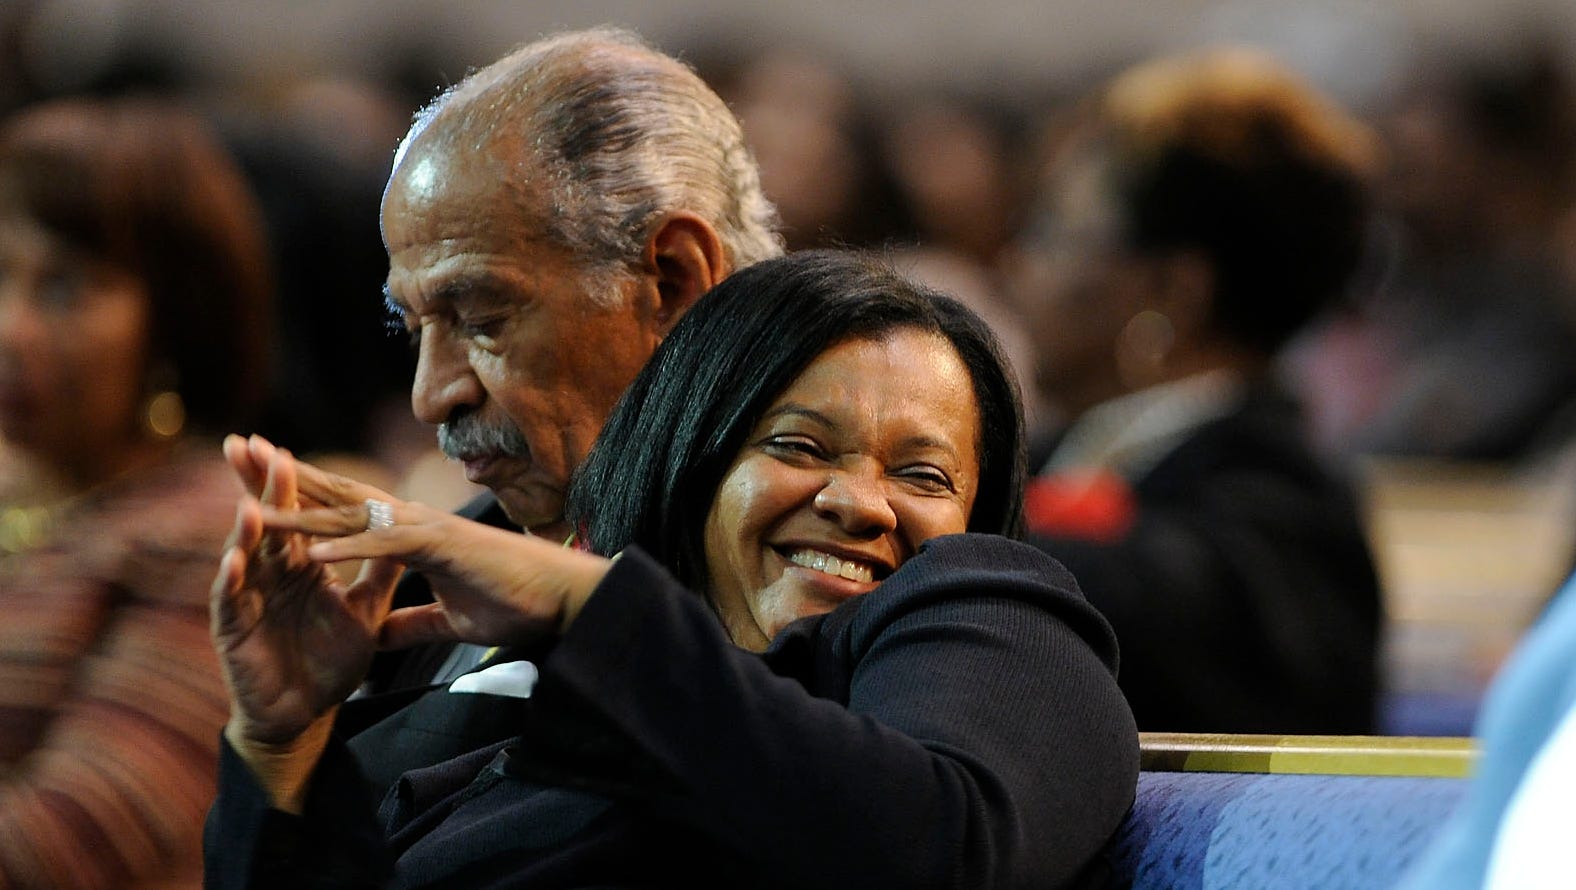 Monica Conyers cozies up to her husband while The Legendary Four Tops sing "Ain't No Woman (Like the One I Got)" during his tribute at Greater Grace Temple Church in Detroit in 2013.